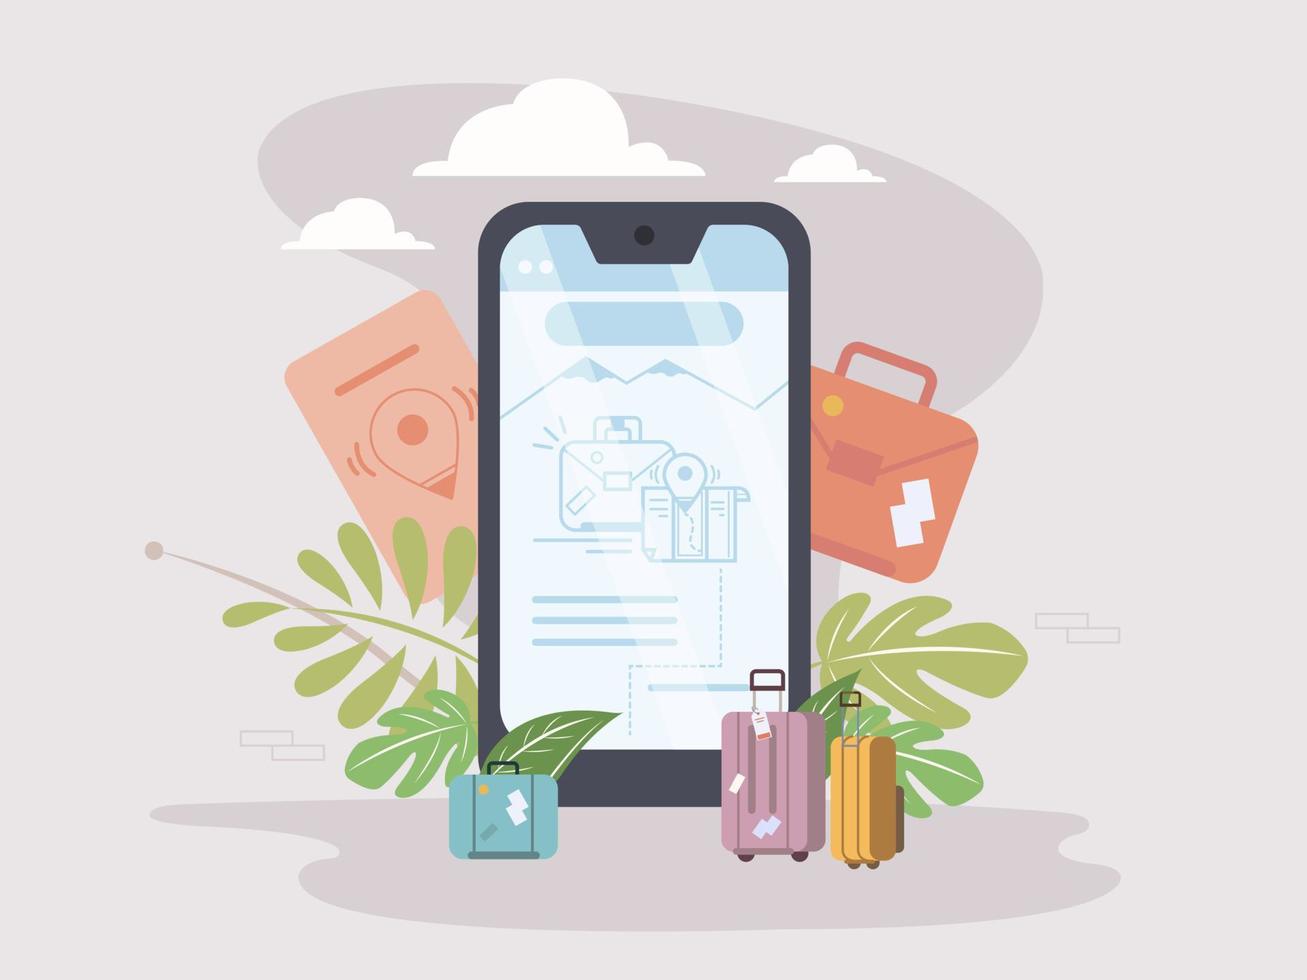 Buy air tickets with smartphone and luggage around. nature destination. vector